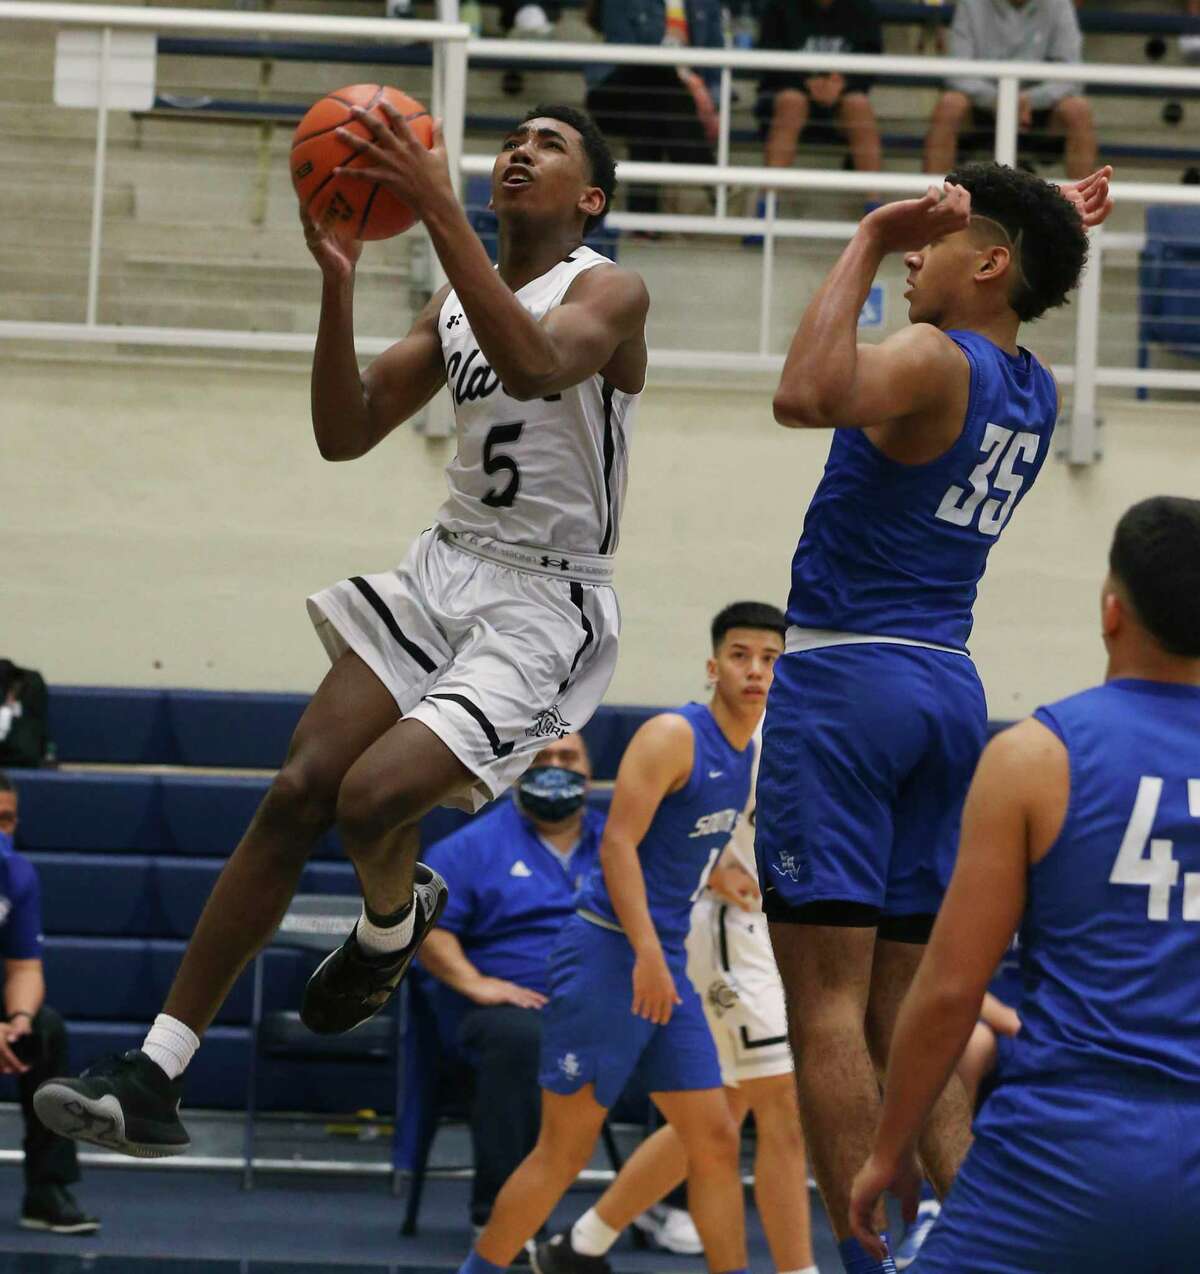 Clark senior guard Jordan Mason notched consecutive double-doubles last week in a victory against Brandeis (35 points, 10 rebounds) and in an overtime loss to Killeen Ellison (38 points, 13 rebounds).